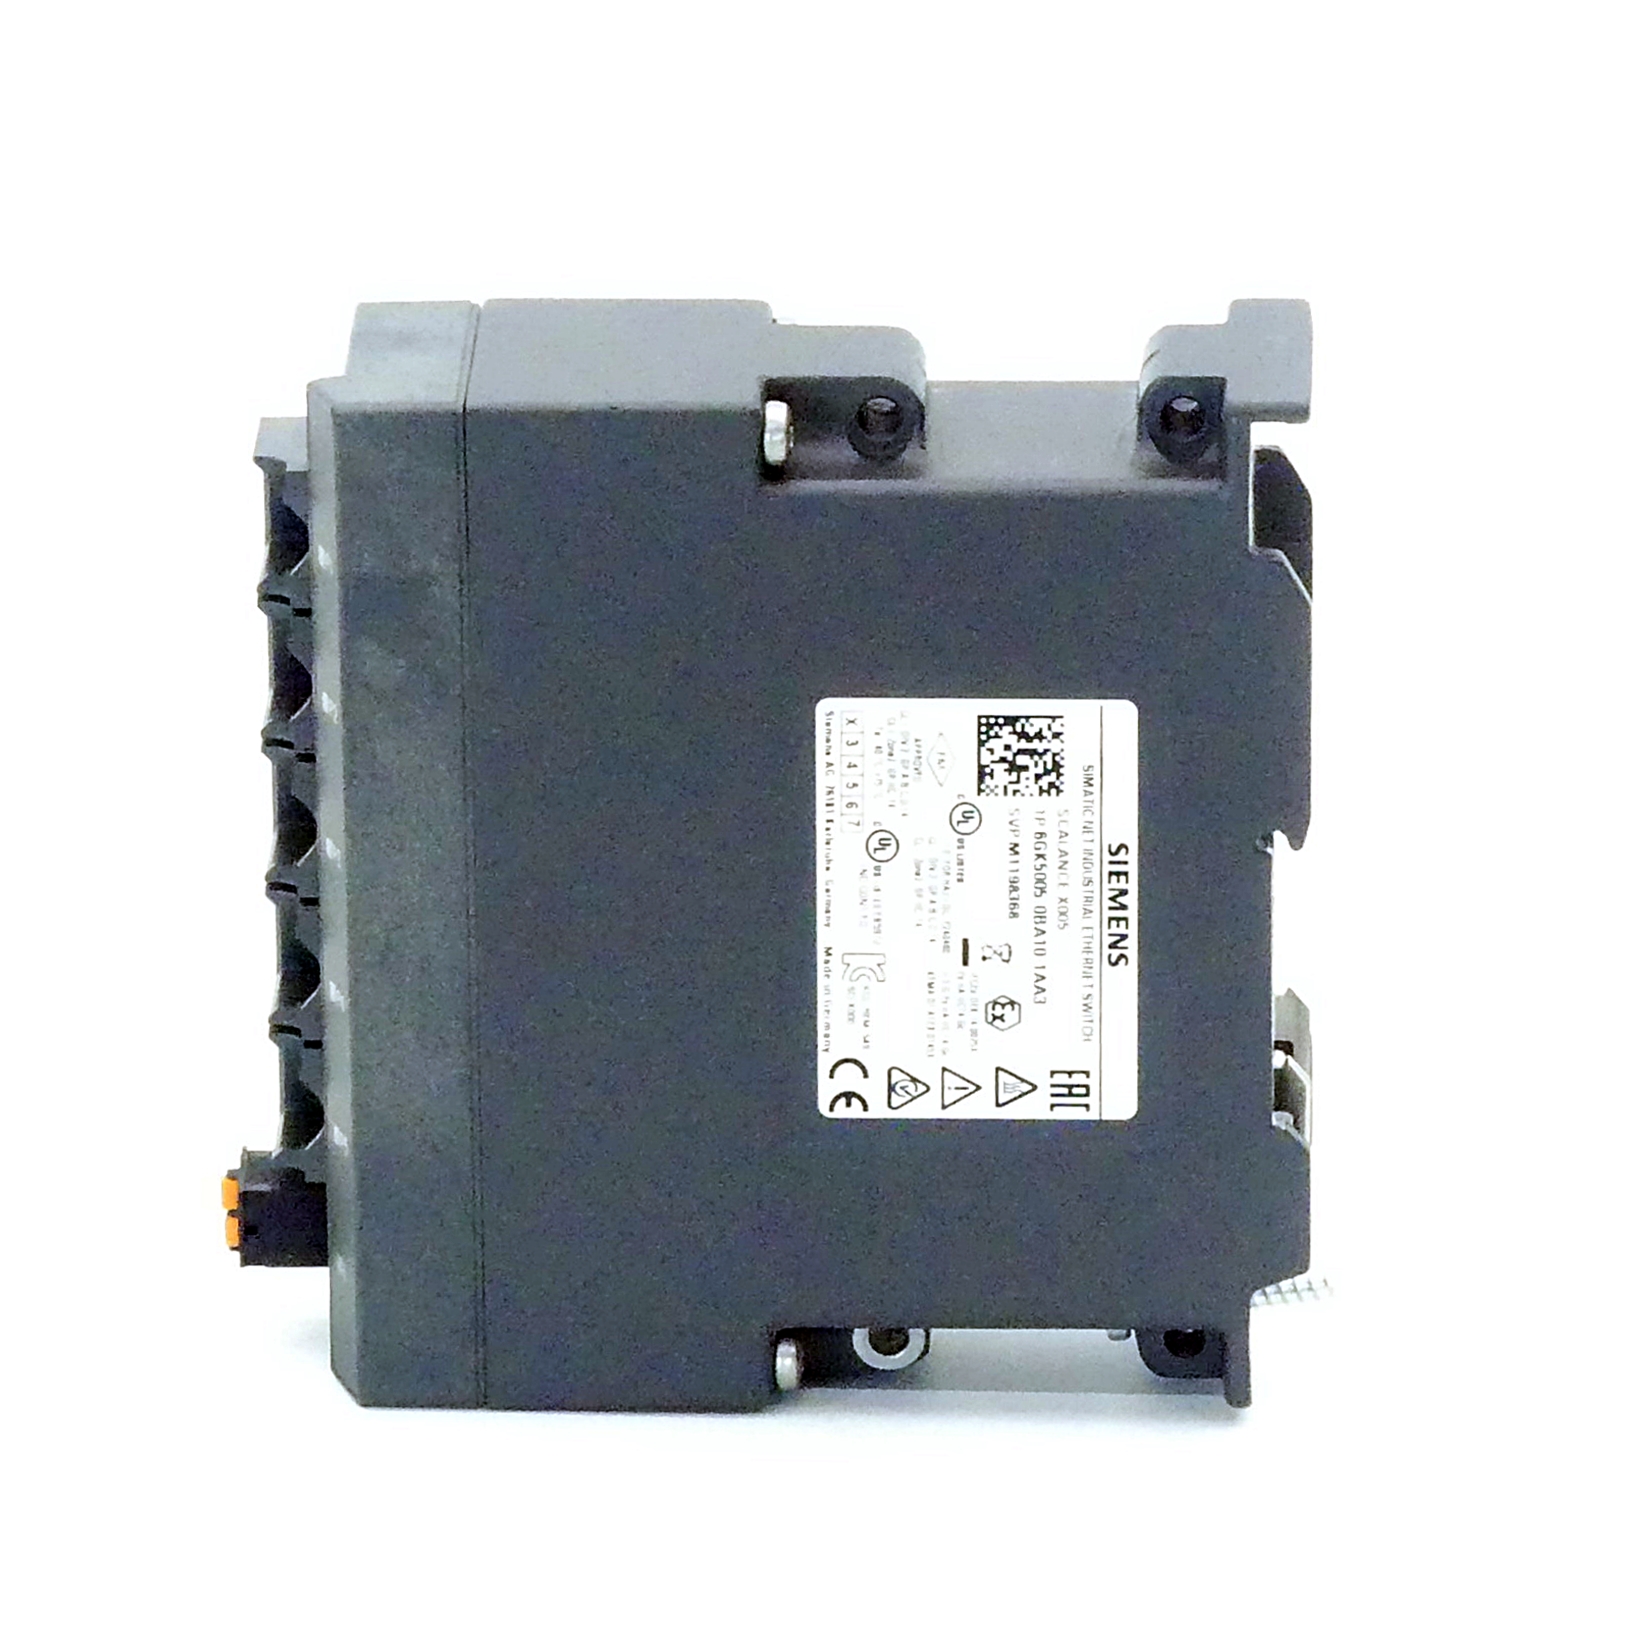 SCALANCE X005 Electrical switch module 